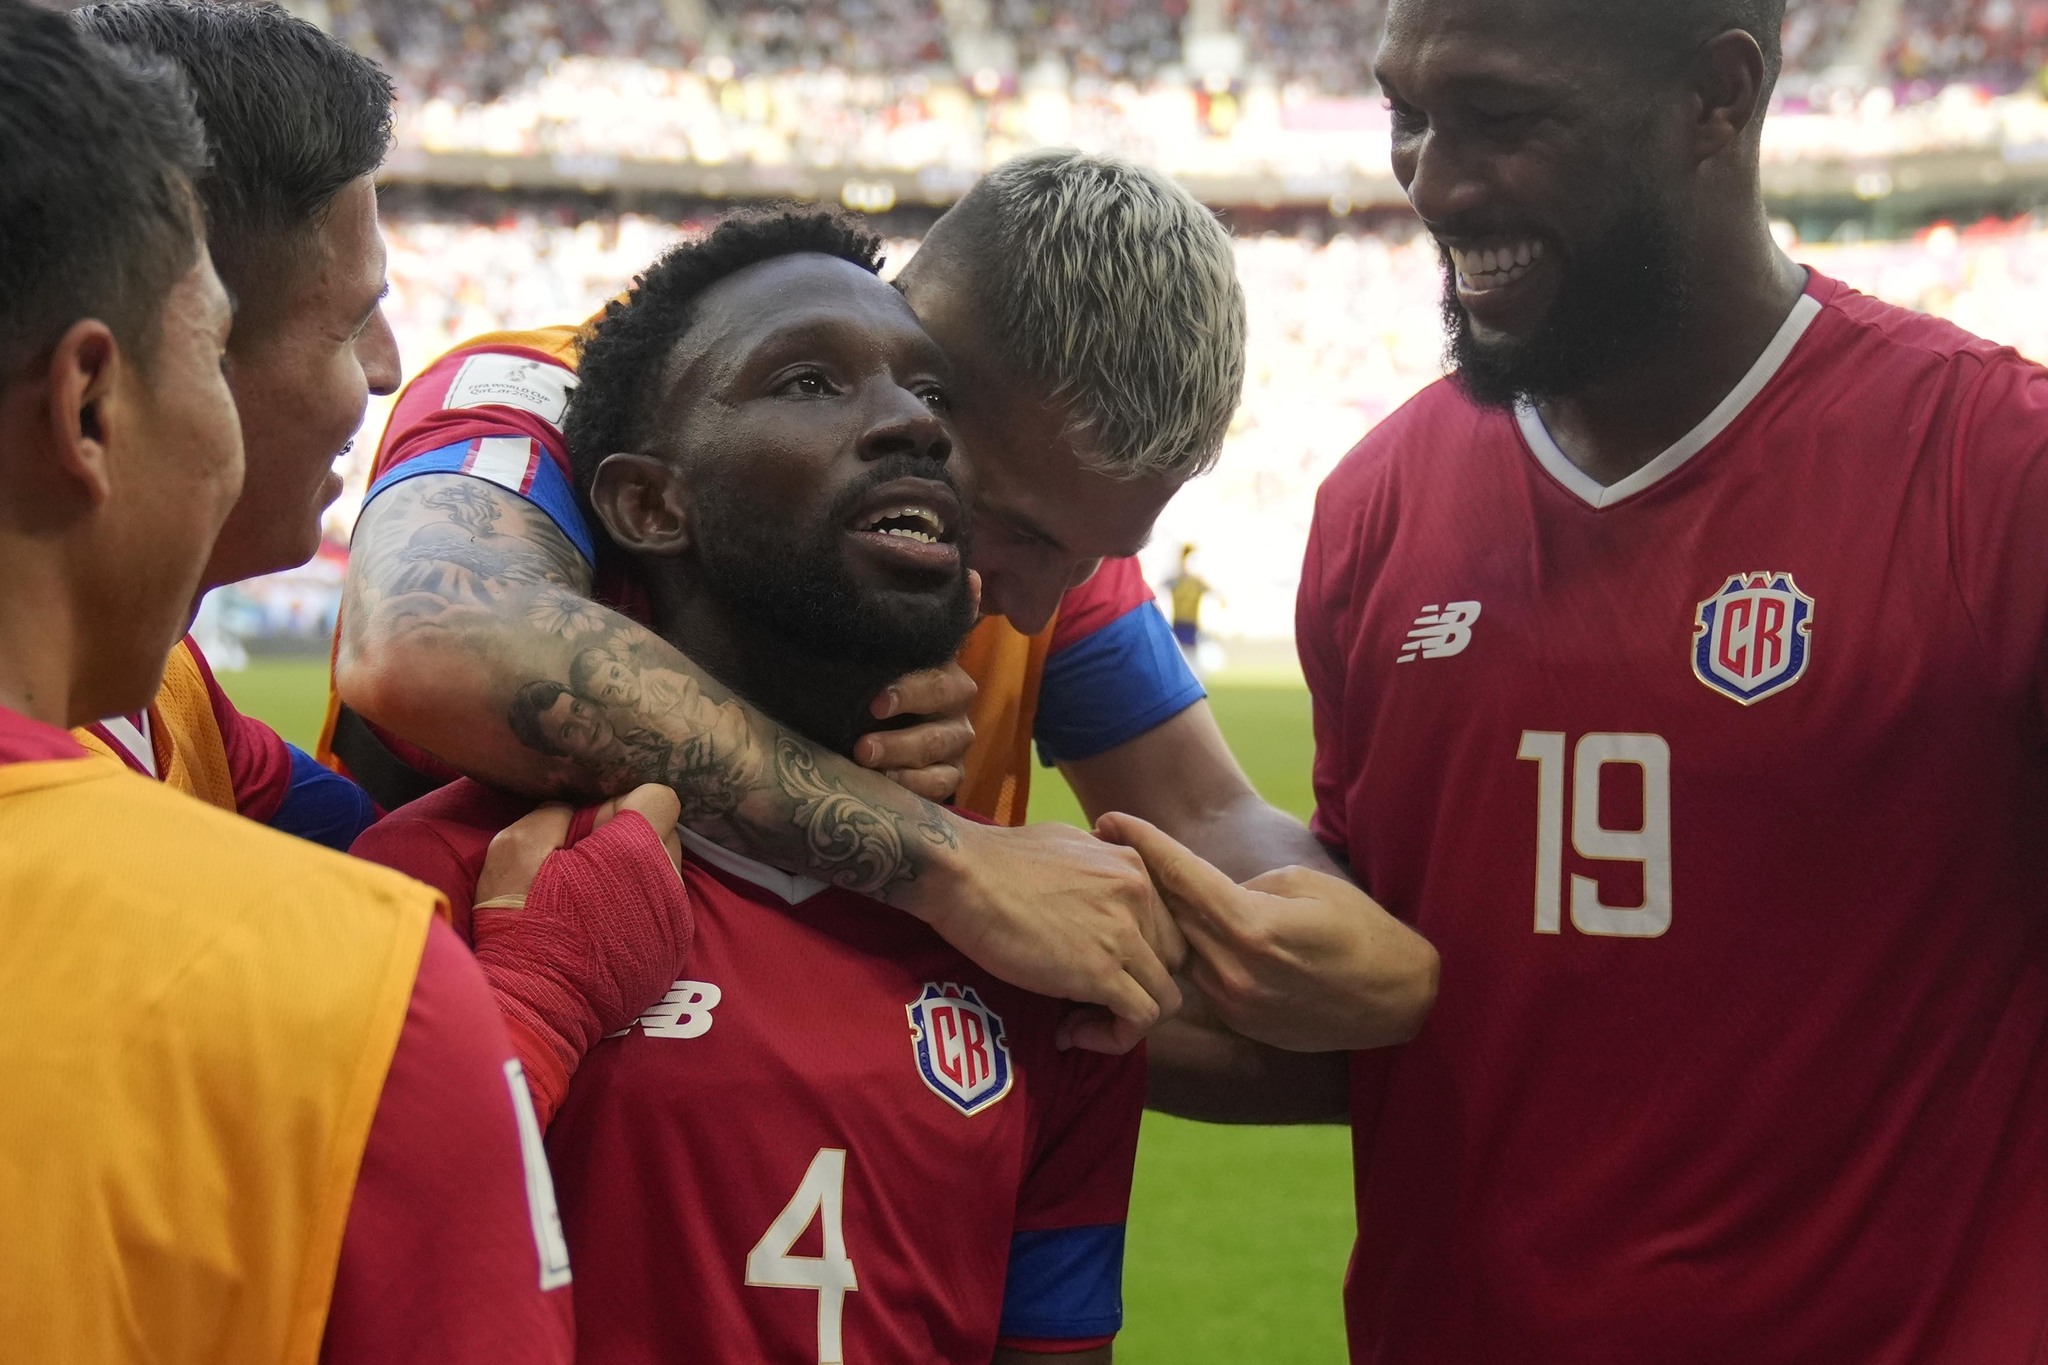  lt;HIT gt;Costa lt;/HIT gt;  lt;HIT gt;Rica lt;/HIT gt;'s Keysher Fuller celebrates with team mates after scoring his side's opening  lt;HIT gt;goal lt;/HIT gt; during the World Cup, group E soccer match between Japan and  lt;HIT gt;Costa lt;/HIT gt;  lt;HIT gt;Rica lt;/HIT gt;, at the Ahmad Bin Ali Stadium in Al Rayyan , Qatar, Sunday, Nov. 27, 2022. (AP Photo/Francisco Seco)